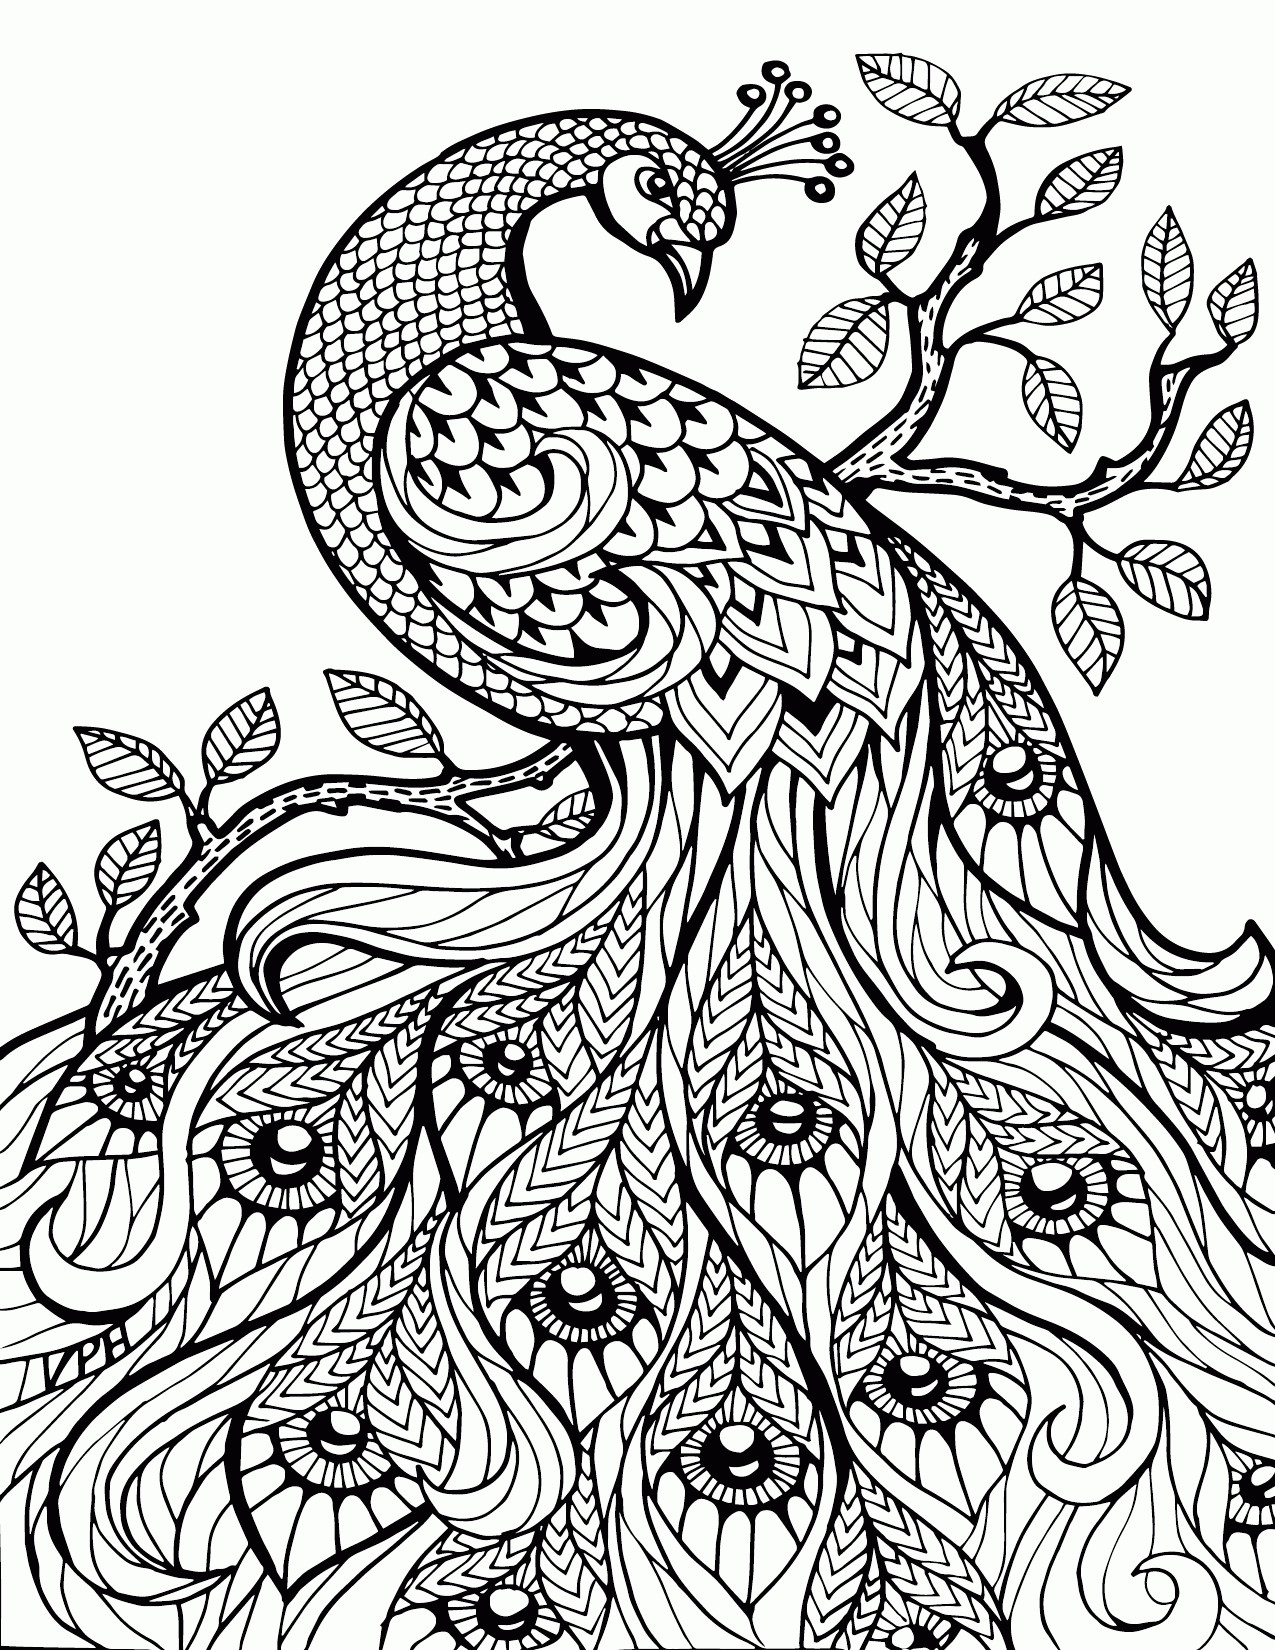 Stress Relief Coloring Pages For Adults
 Adult Stress Relief Coloring Pages Printable Coloring